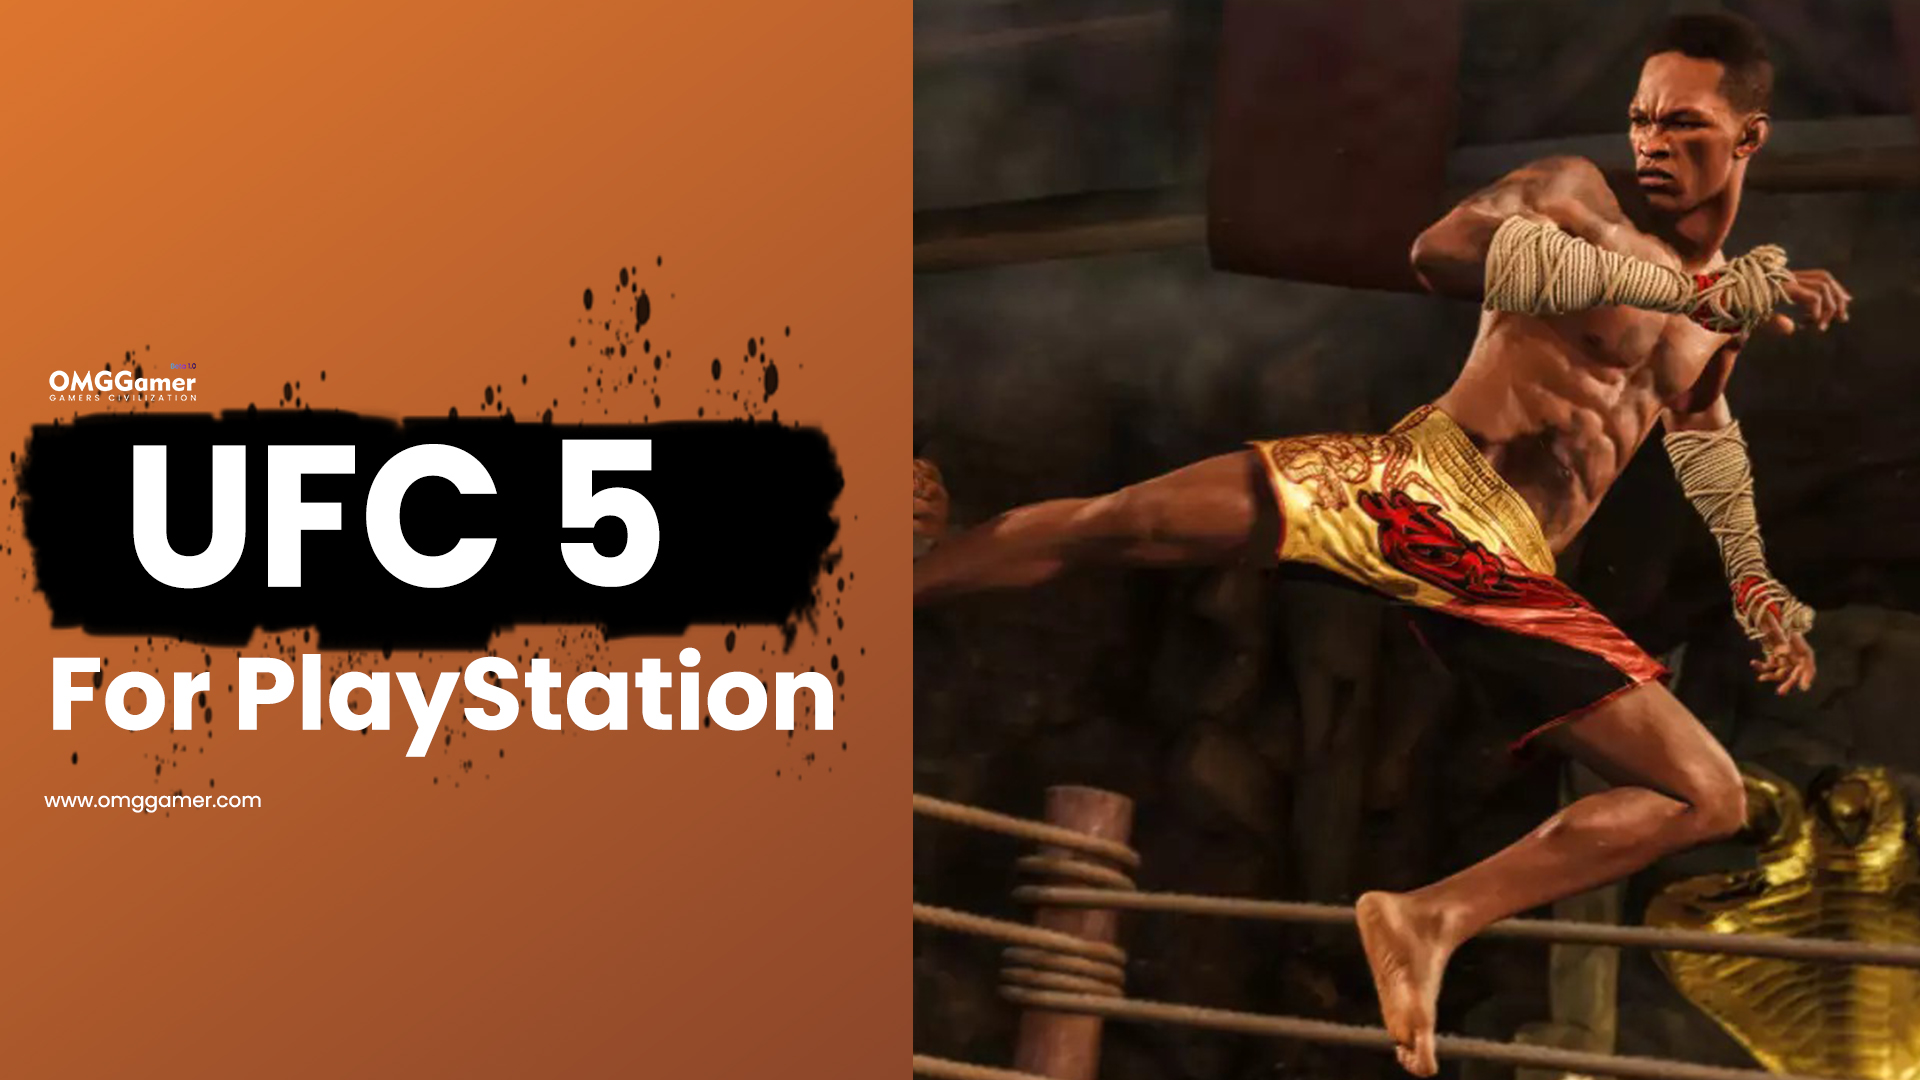 UFC 5 for PlayStation